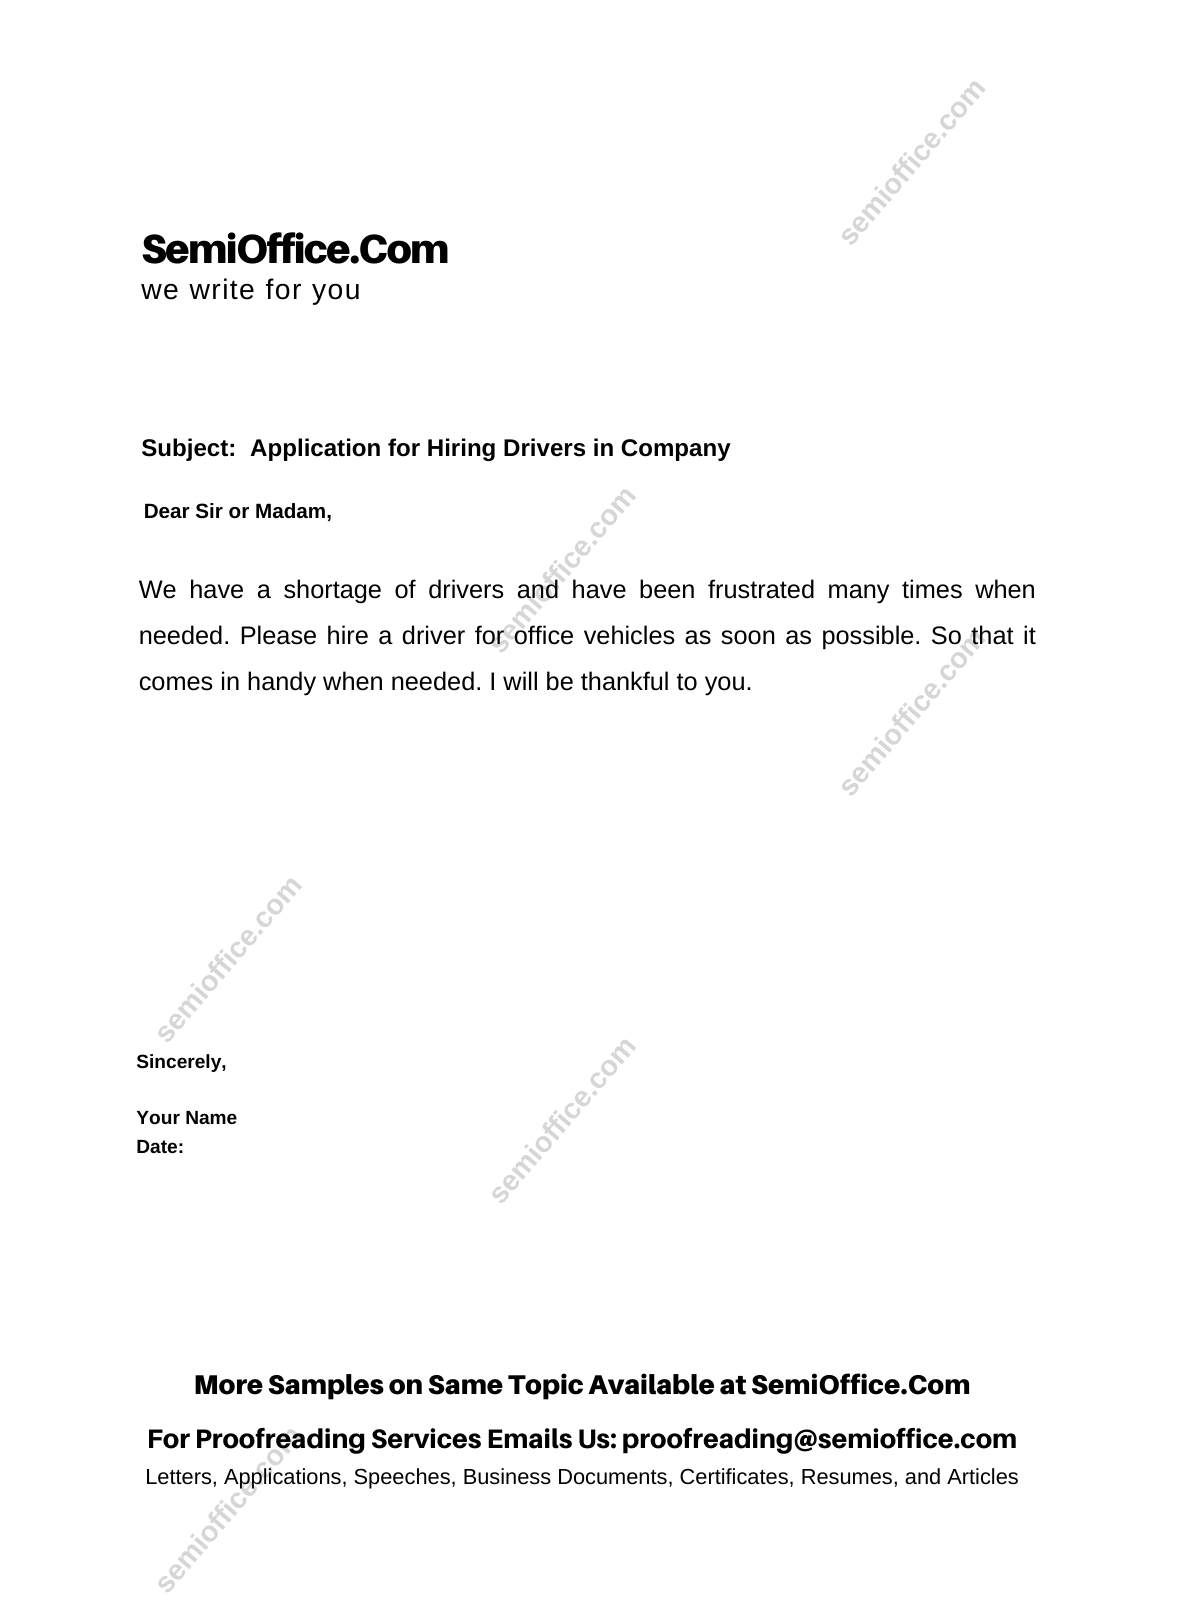 sample application letter for company driver